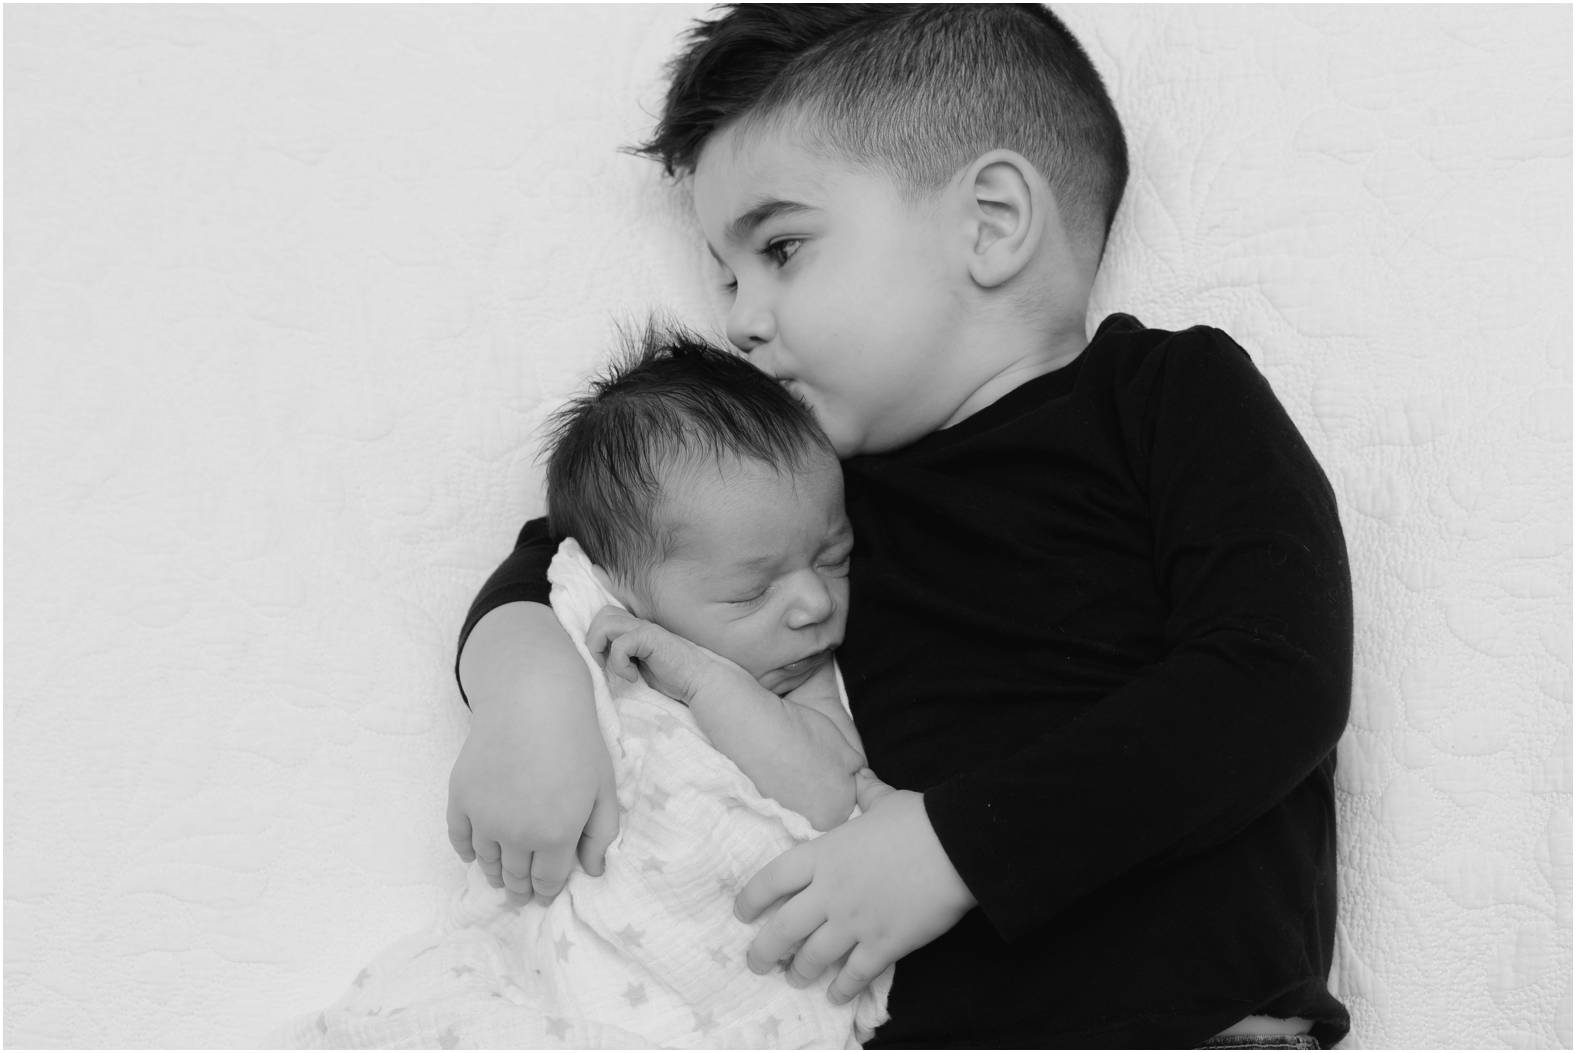 Black and white image of toddler boy snuggling his newborn baby brother